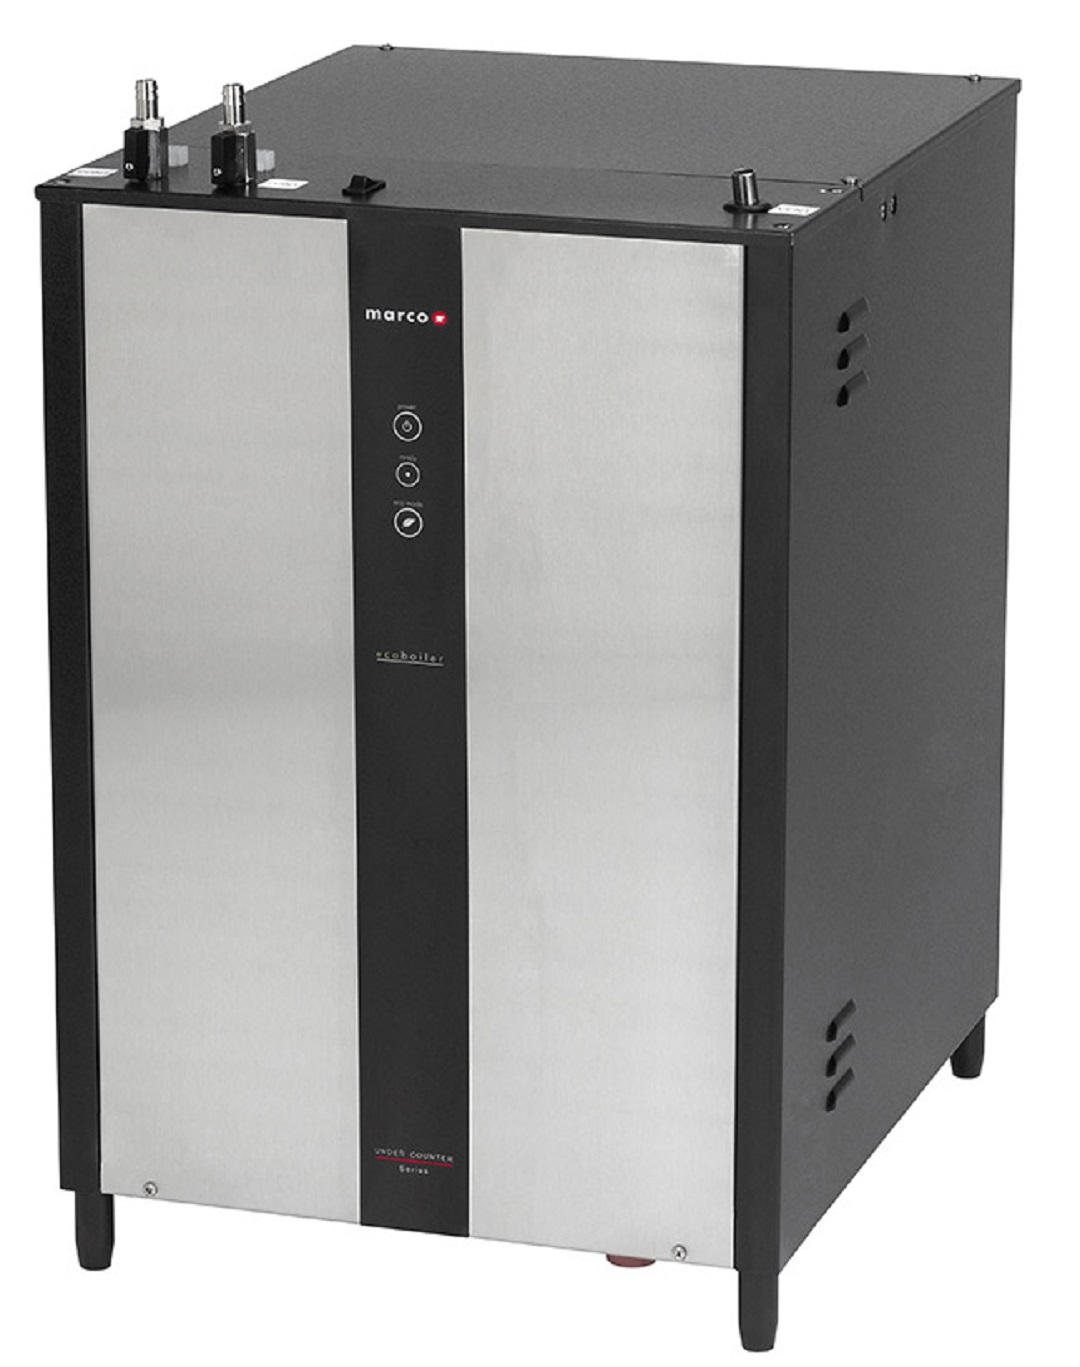 Marco Ecoboiler UC45 Under Counter Water Boiler (1000744A)